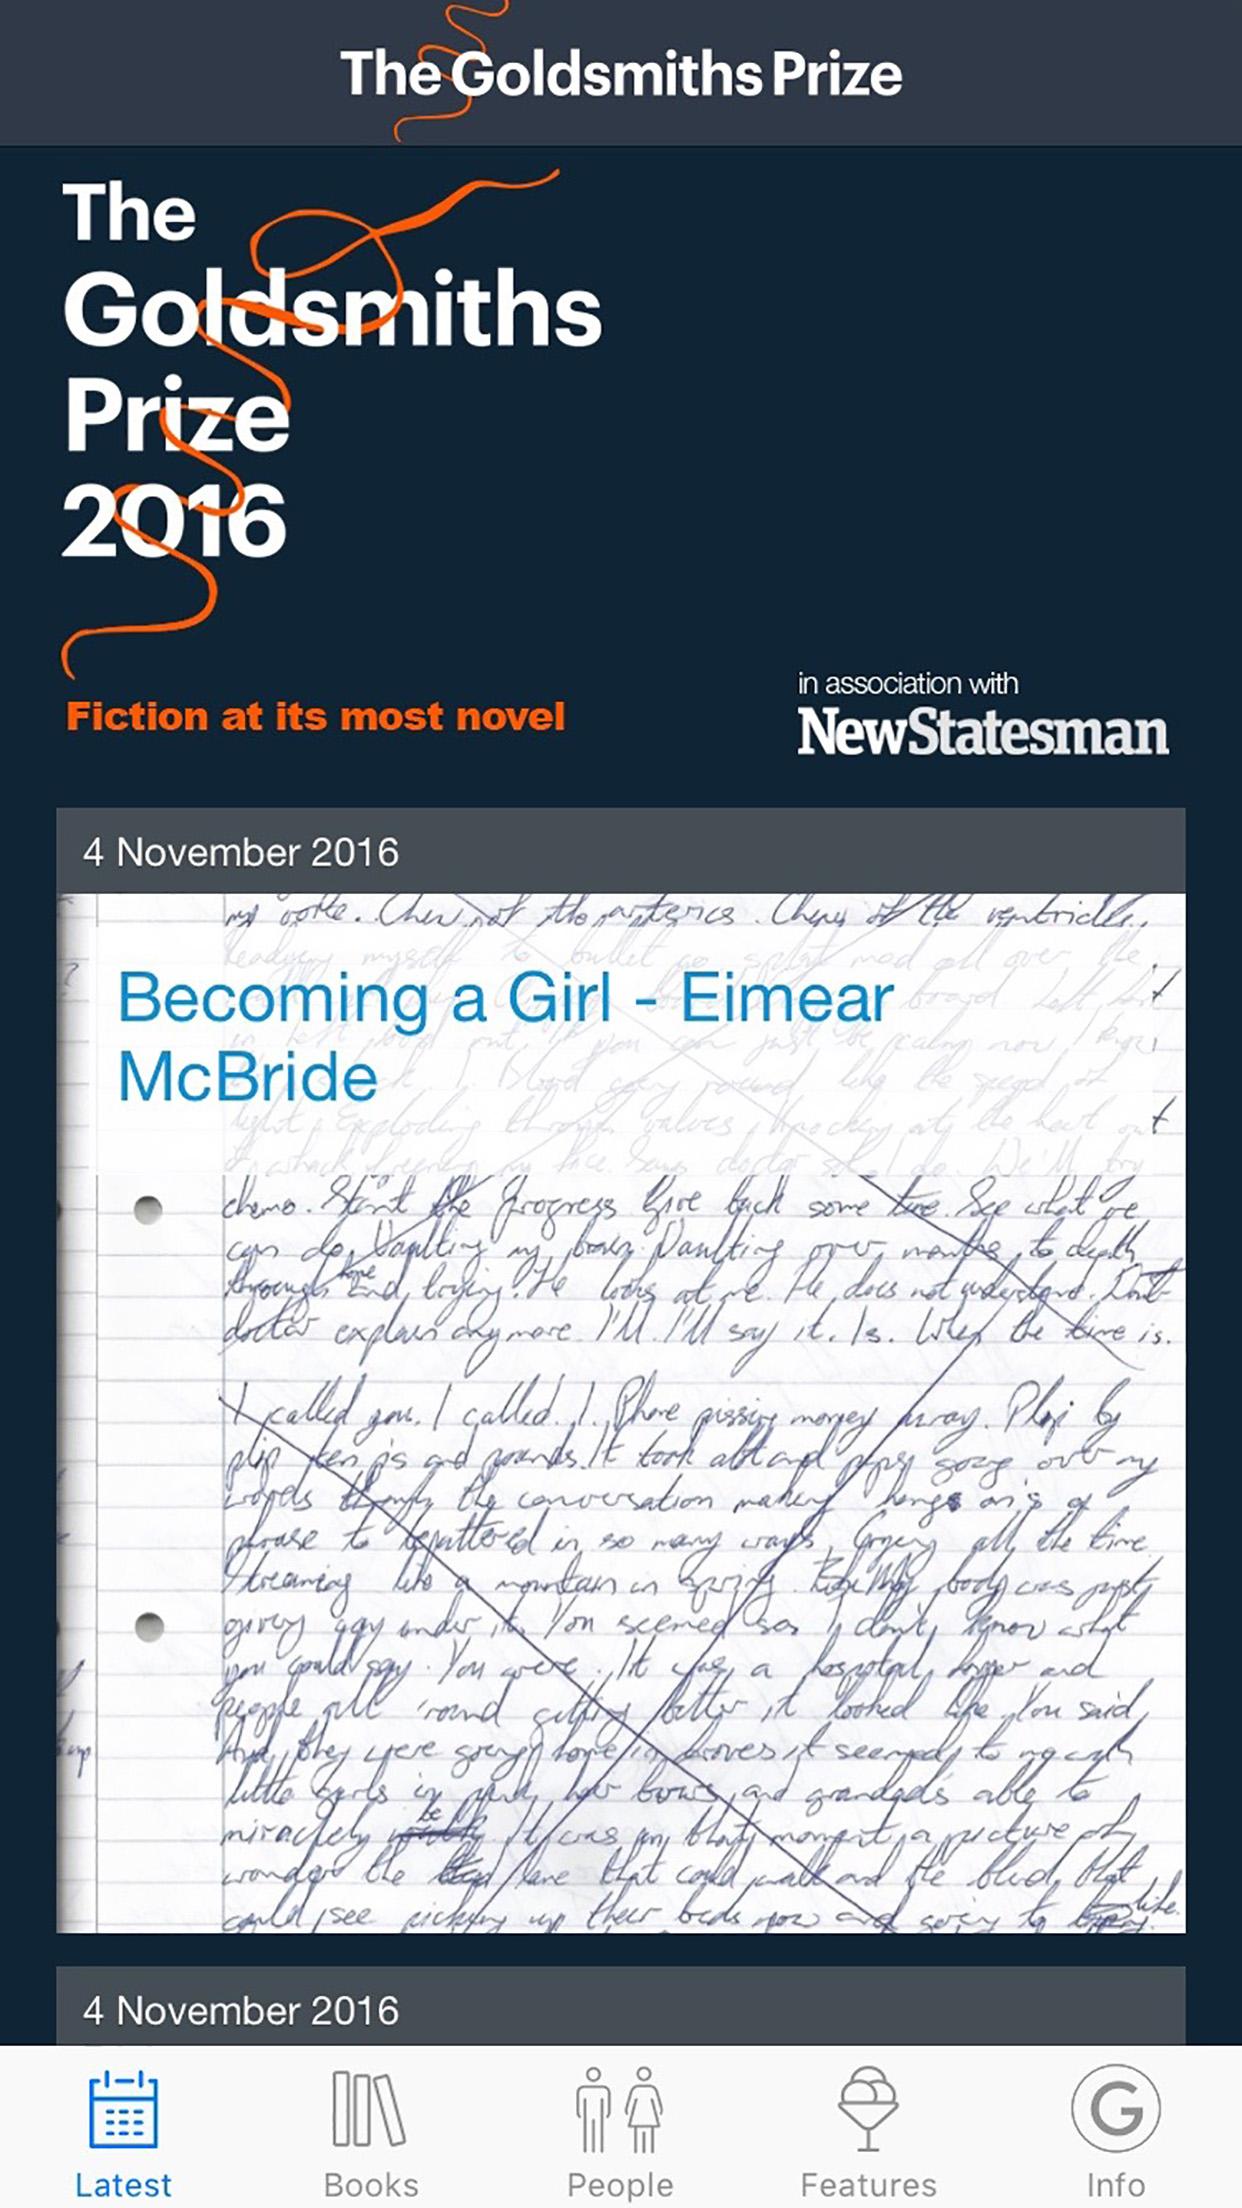 Goldsmiths Prize app on an iPhone with detail of Eimear McBride's manuscript for 'A Girl is a Half-formed Thing'.